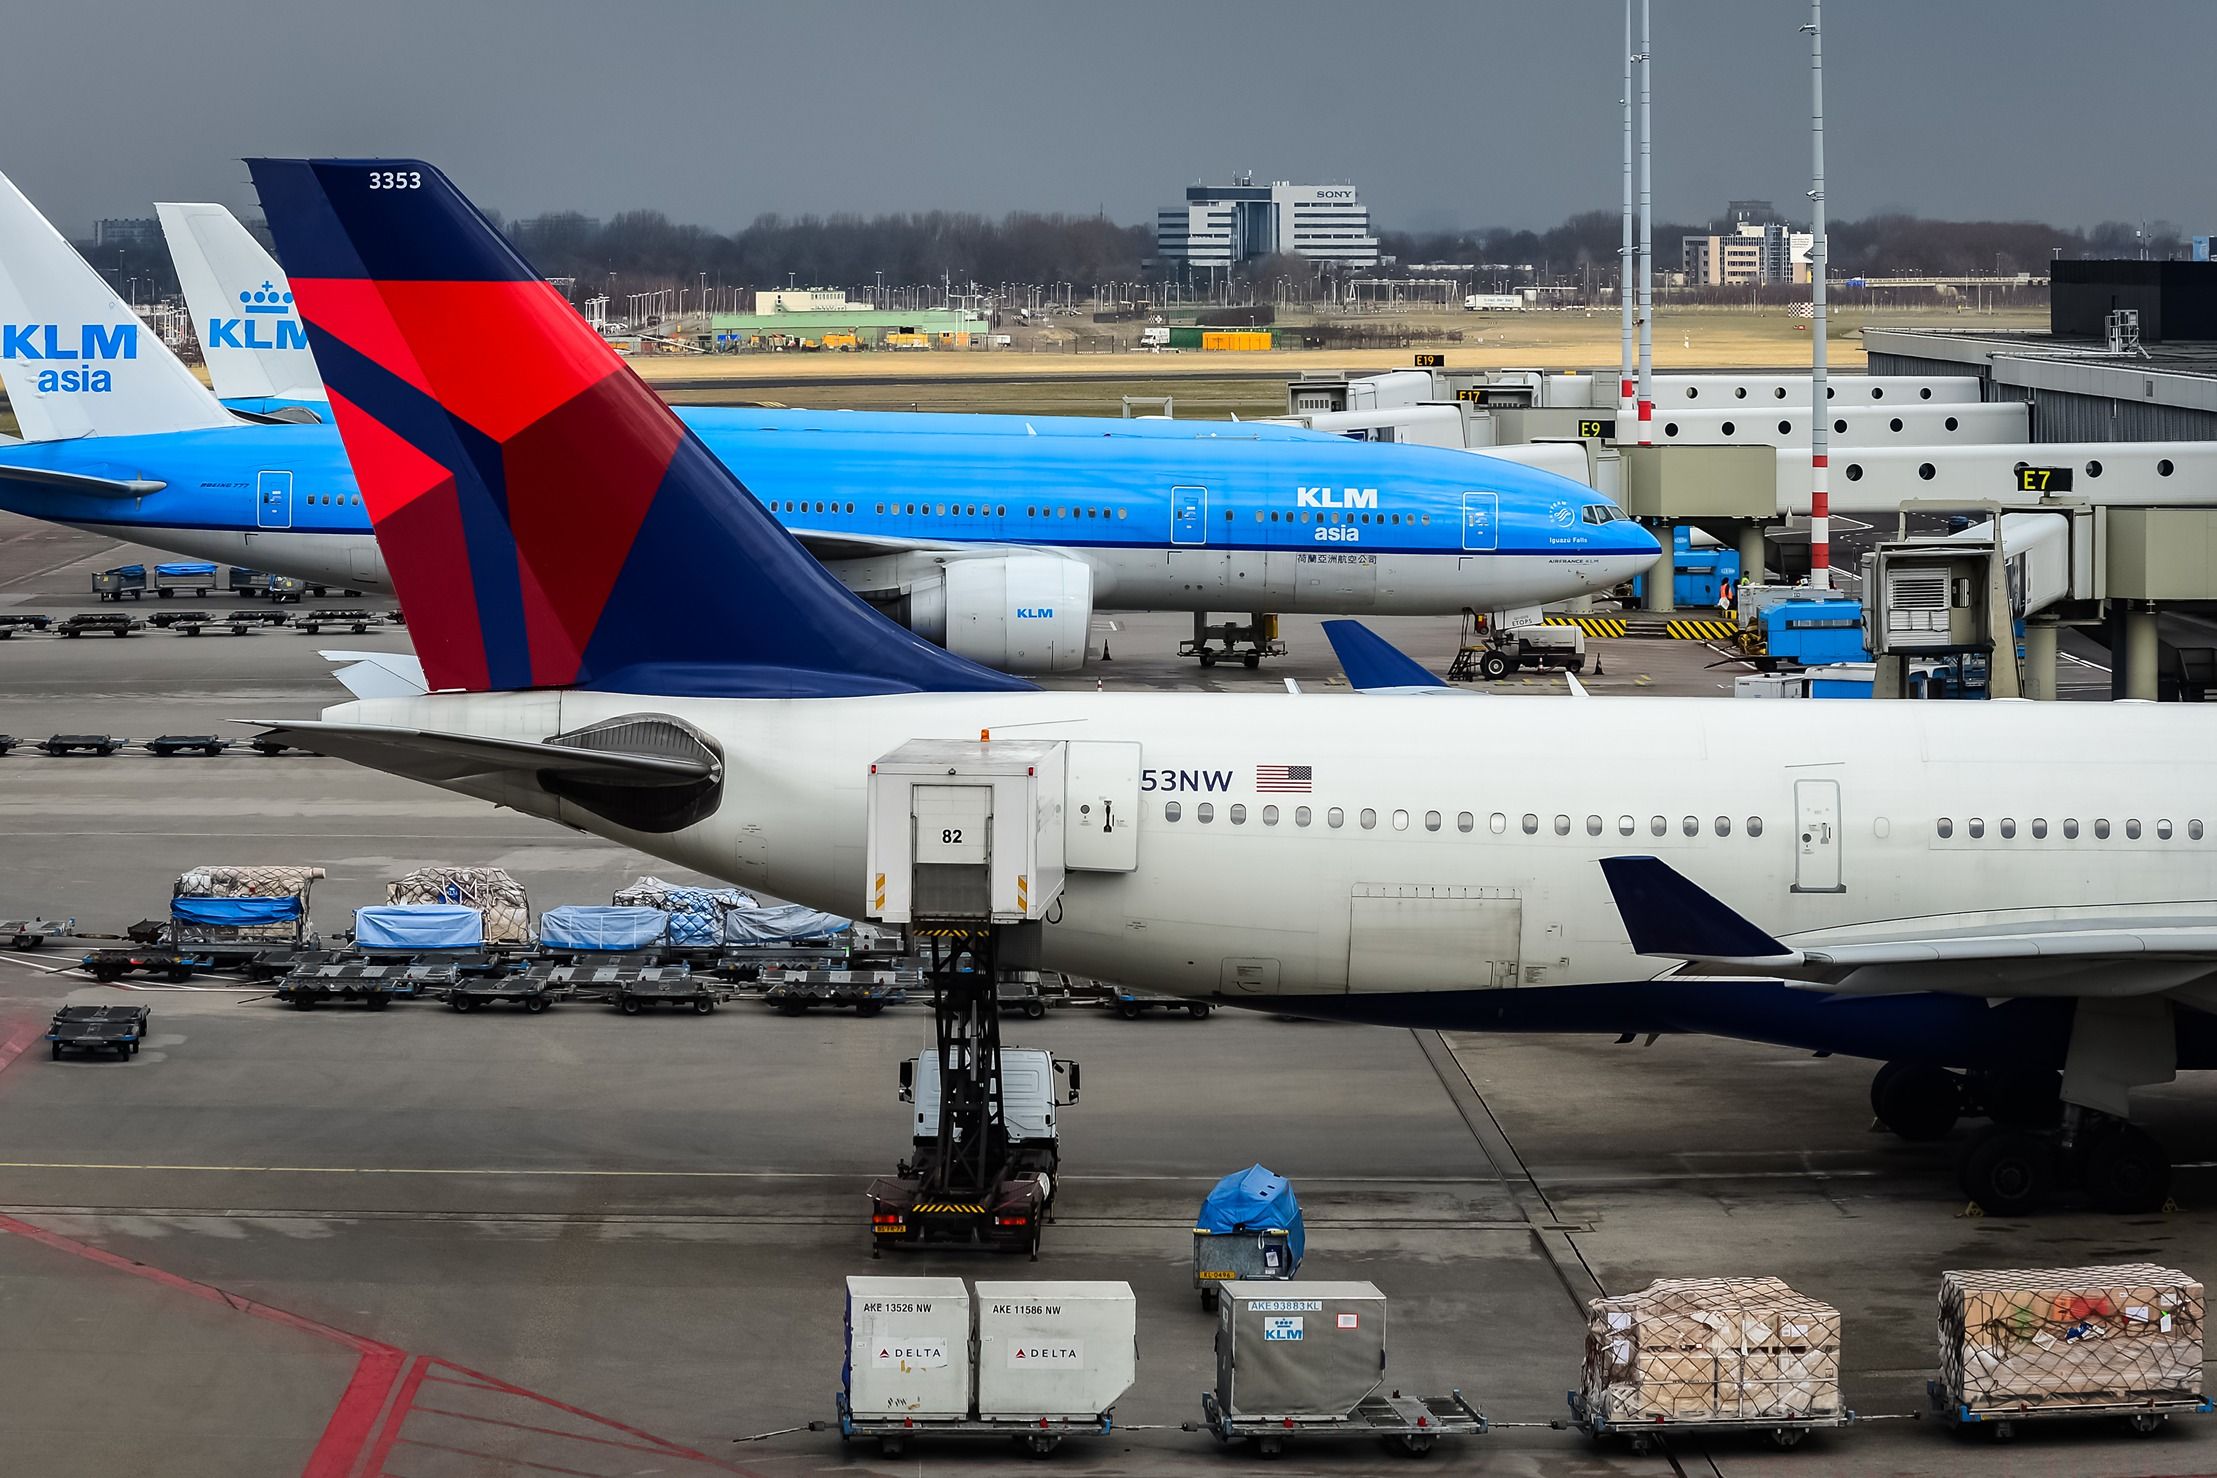 KLM and Delta Air Lines aircraft parked on the apron at Amsterdam Schiphol Airport.